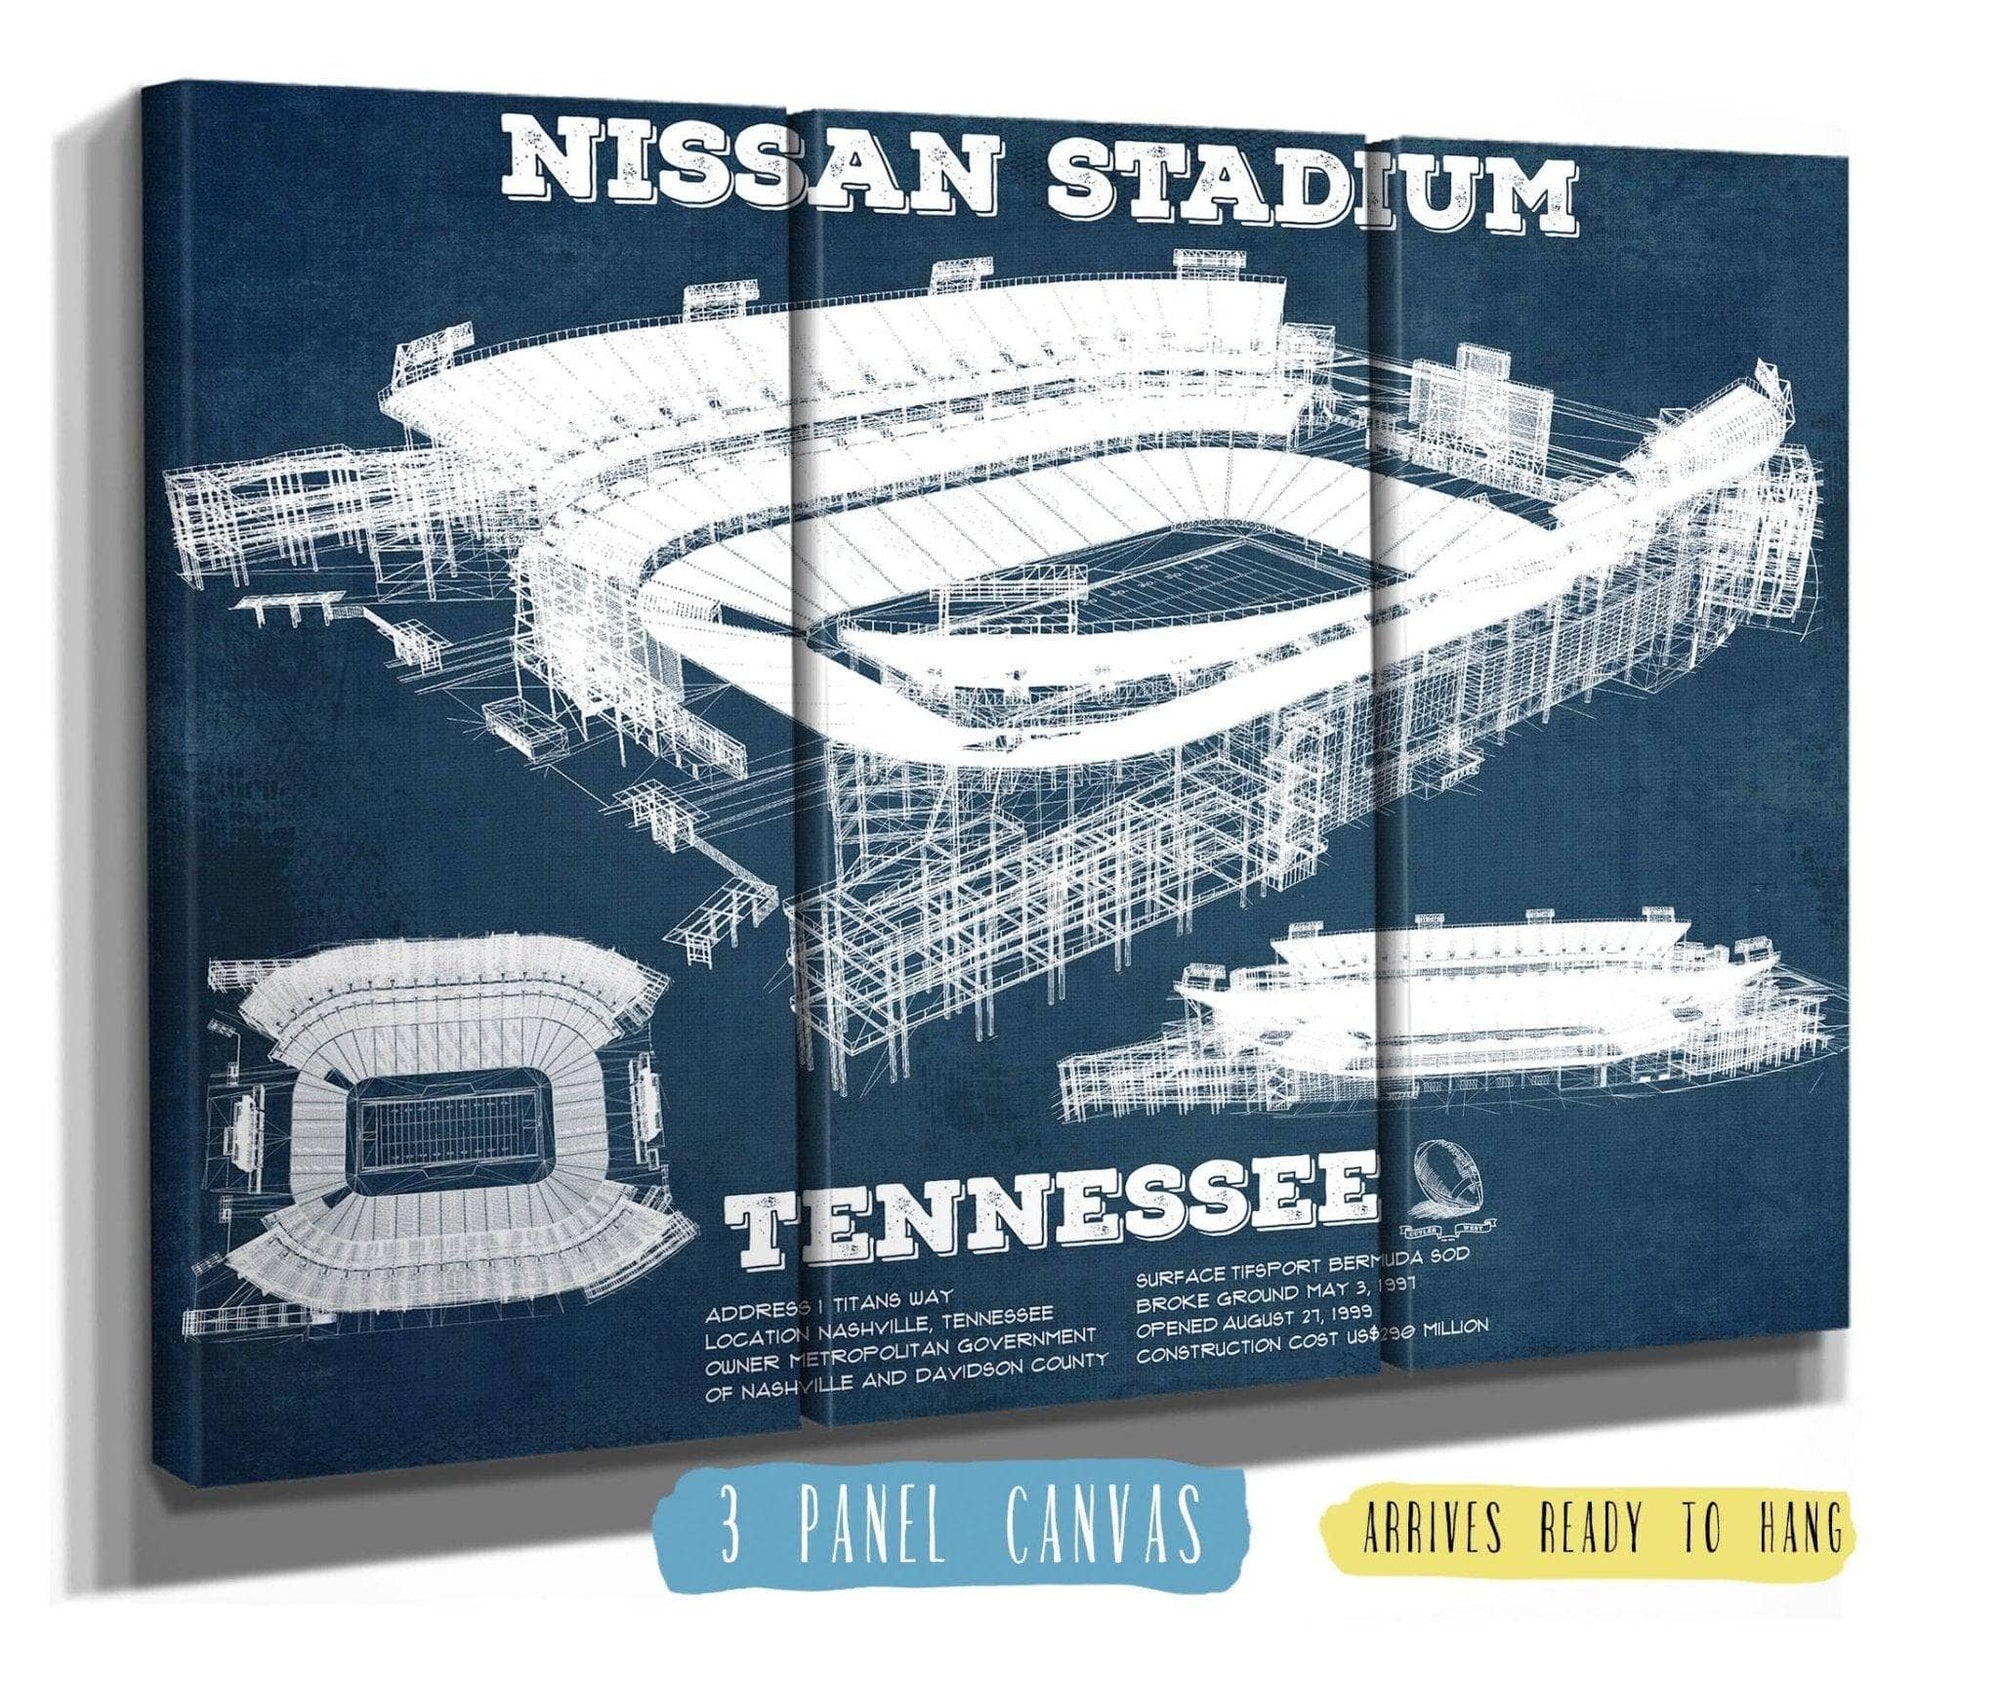 Cutler West Pro Football Collection 48" x 32" / 3 Panel Canvas Wrap Tennessee Titans Nissan Stadium - Vintage Football Print 712523627